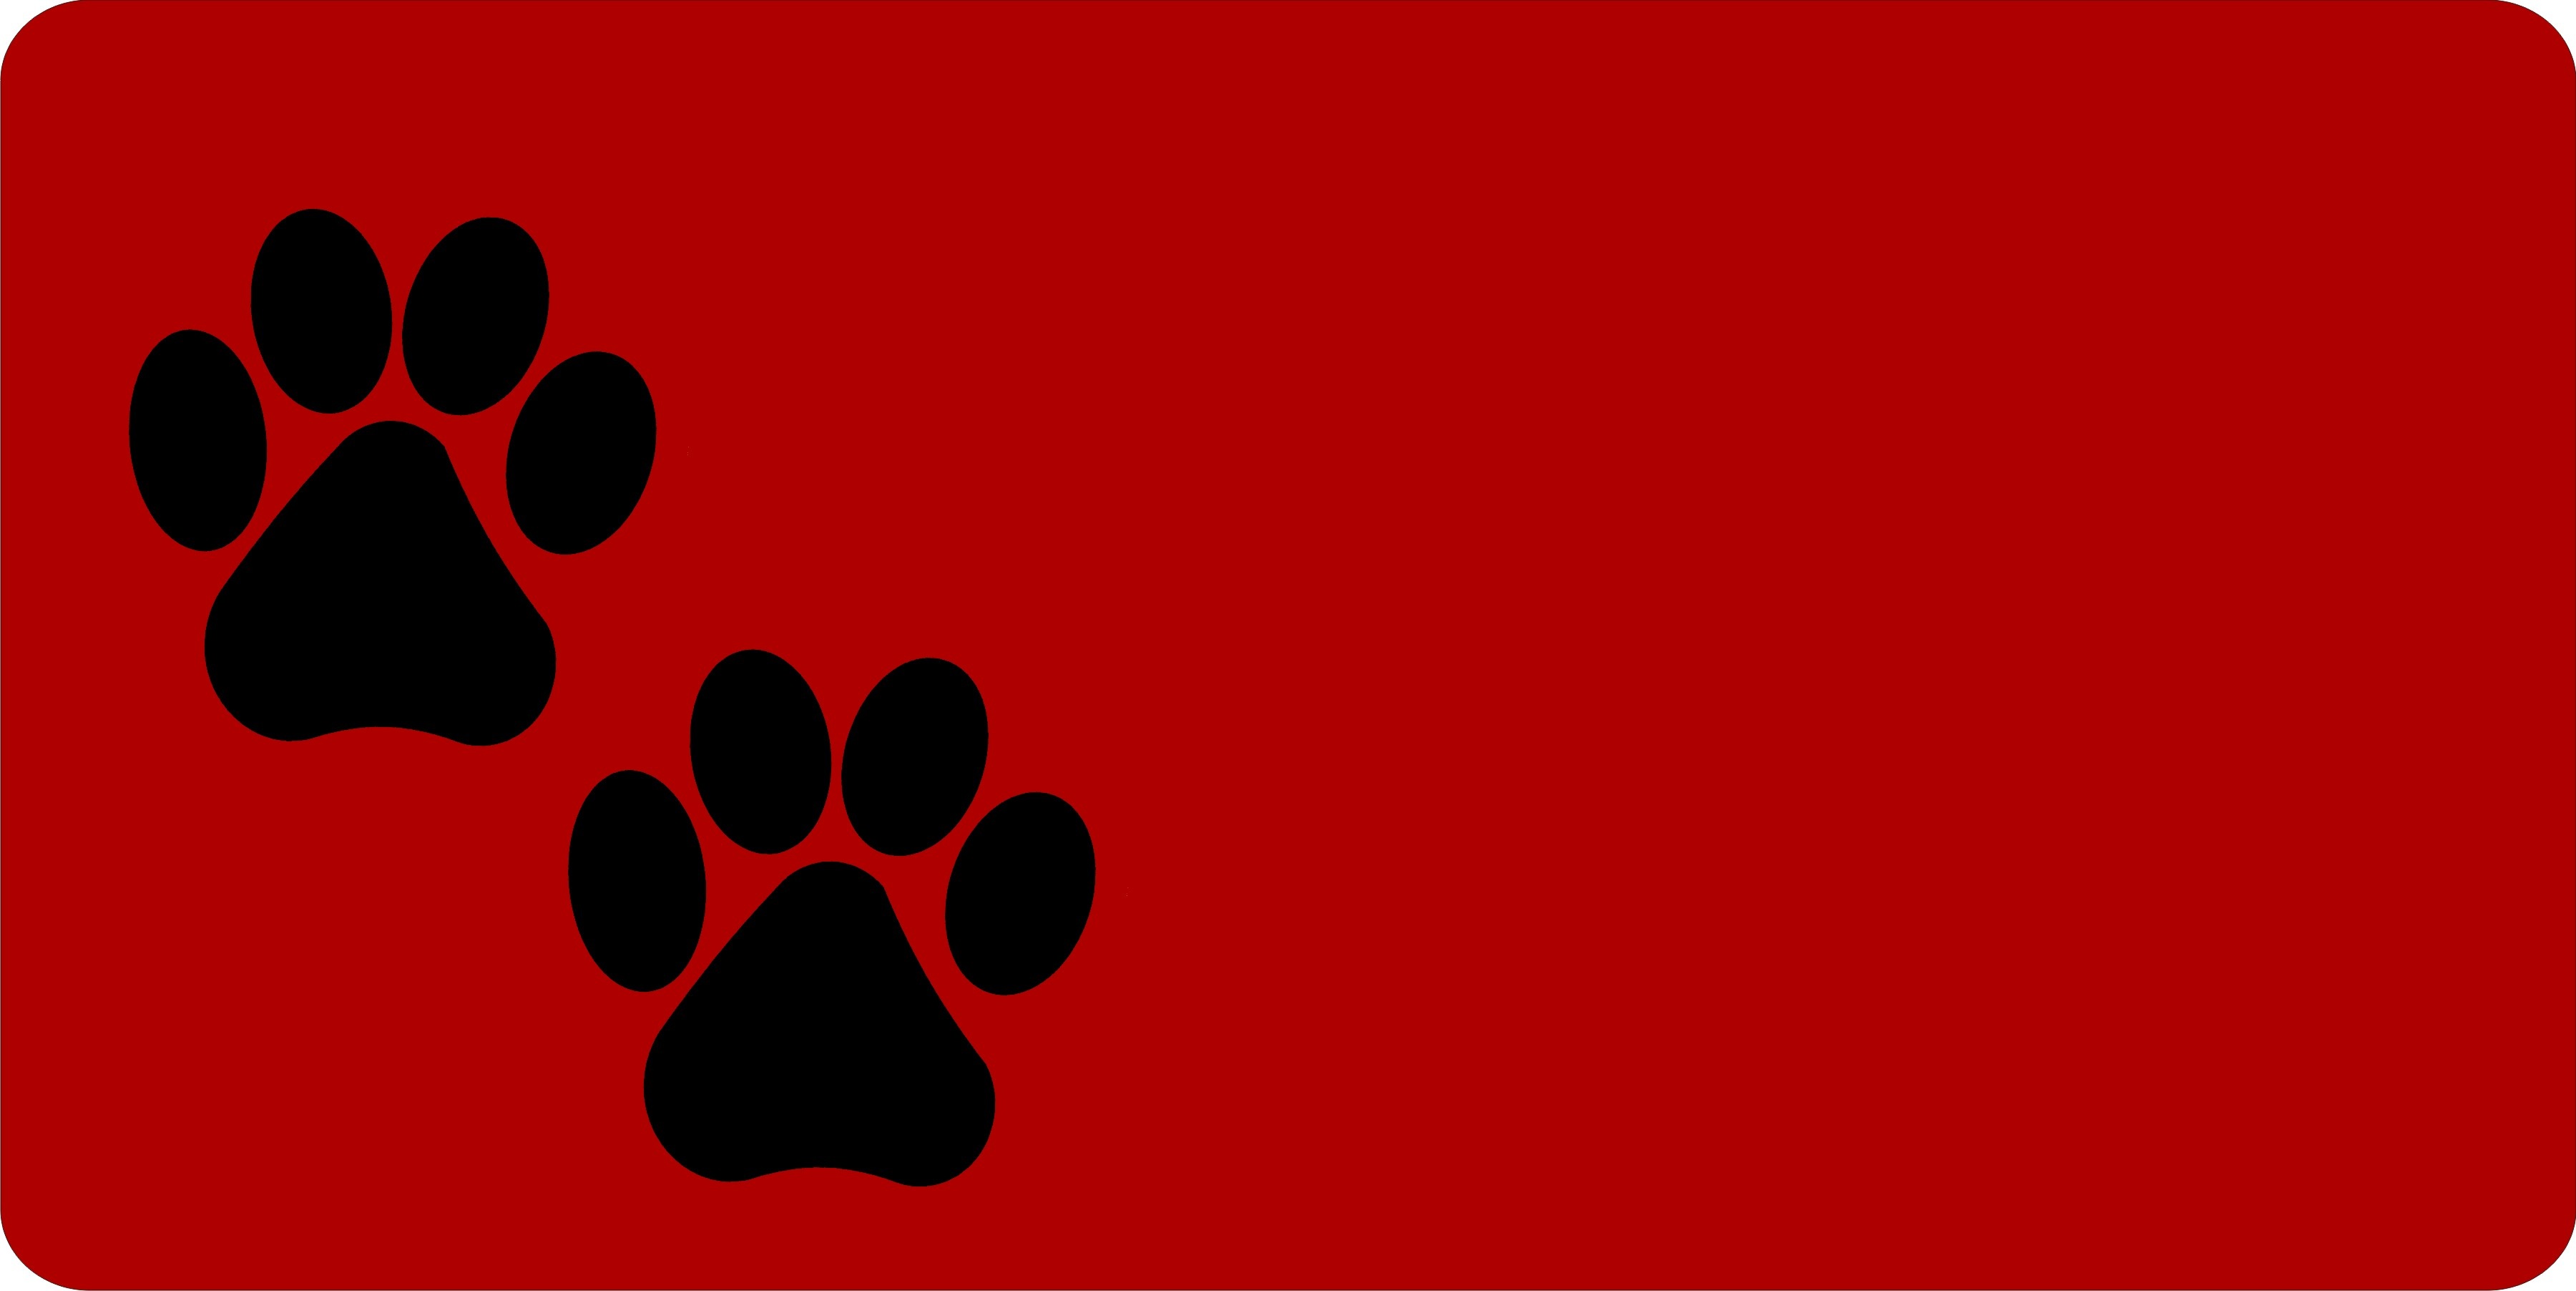 Black Paw Prints Offset On Red LICENSE PLATE Free Personalization on this PLATE